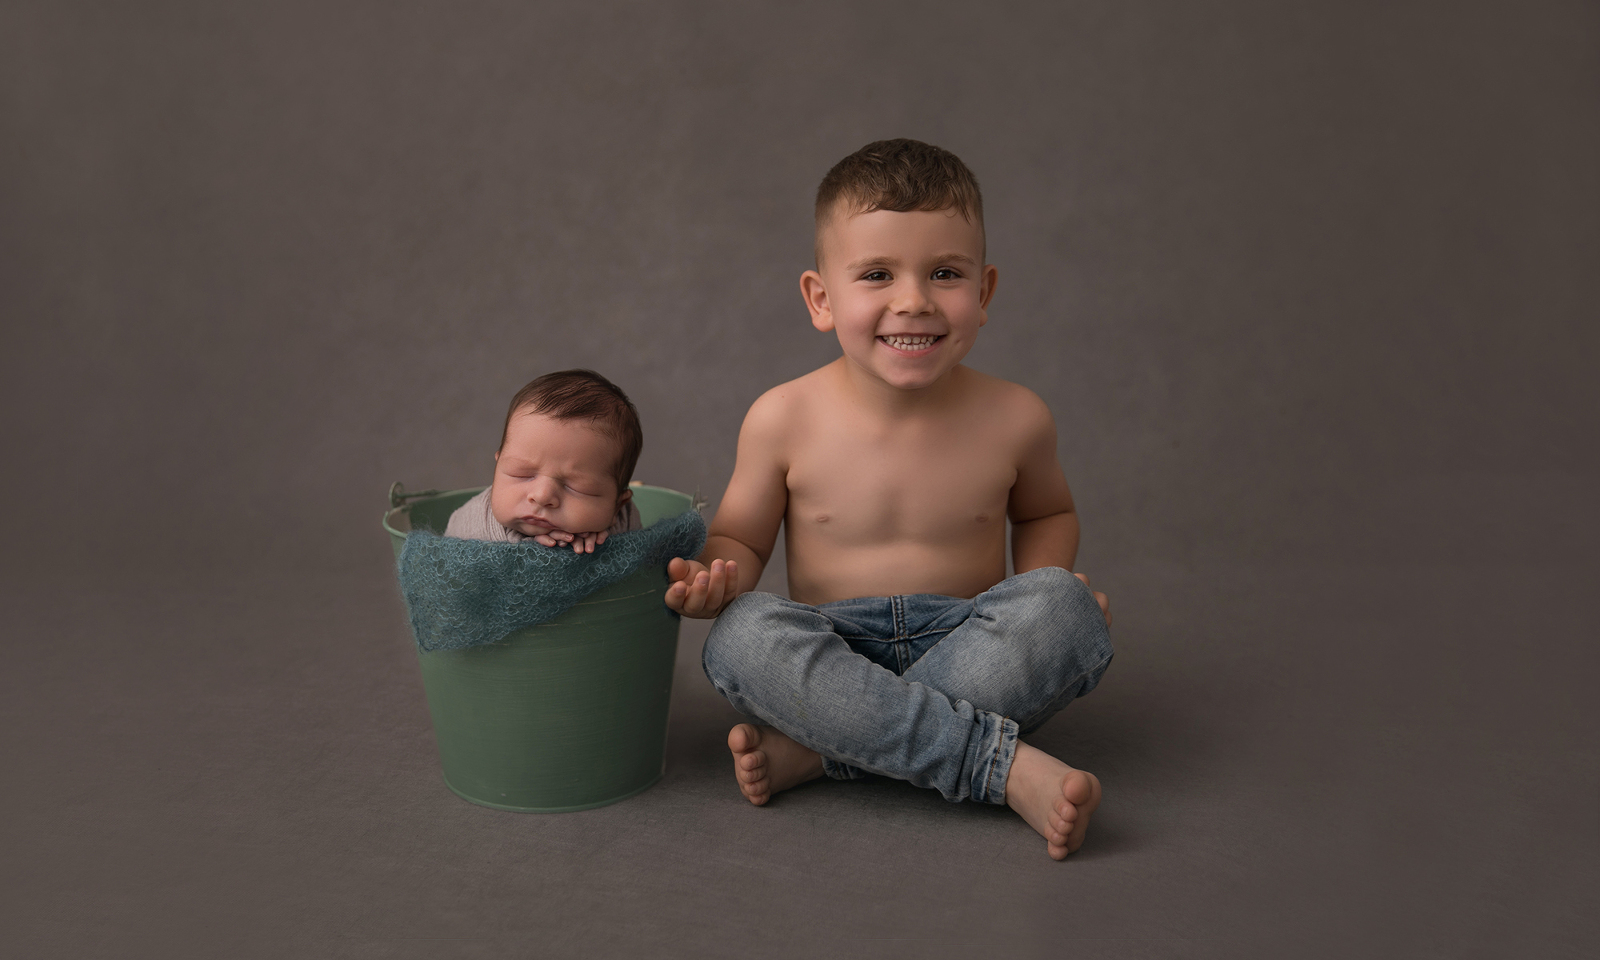 Studio newborn portrait session from the front with grey background of a proud older toddler brother sitting next to his newborn sibling is is sleeping in a green pail. Image by Helga Himer Photography, Sudbury, Ontario.